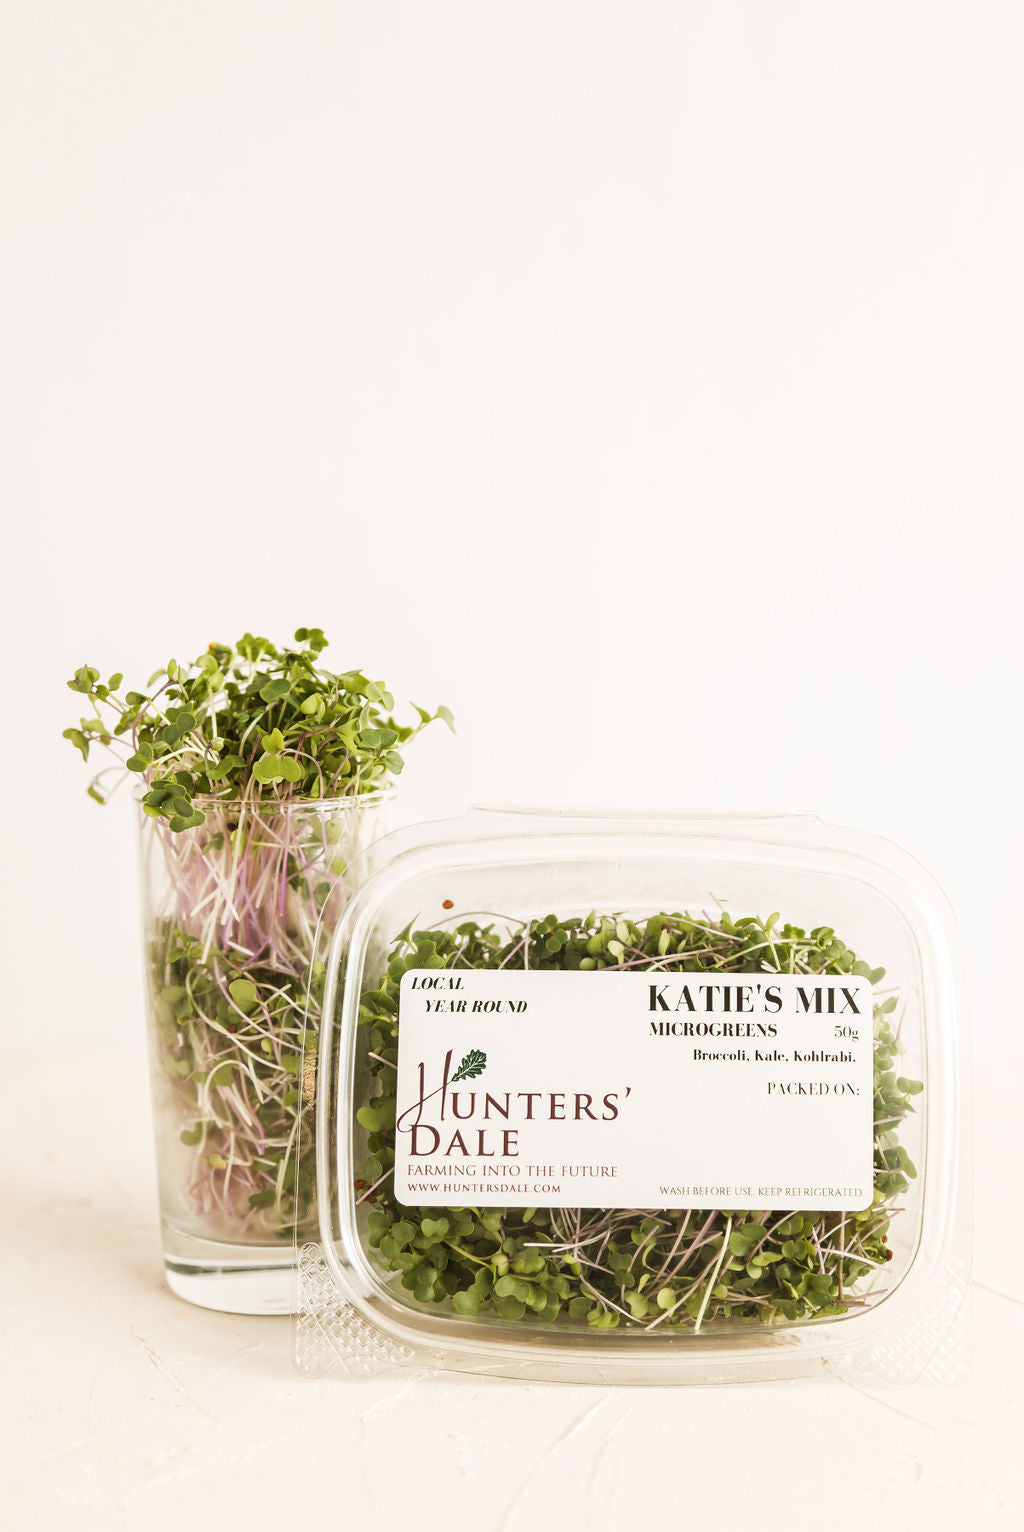 Hunters' Dale microgeens, Fraser Valley microgreens, tasty microgreens, microgreen delivery, food delivery